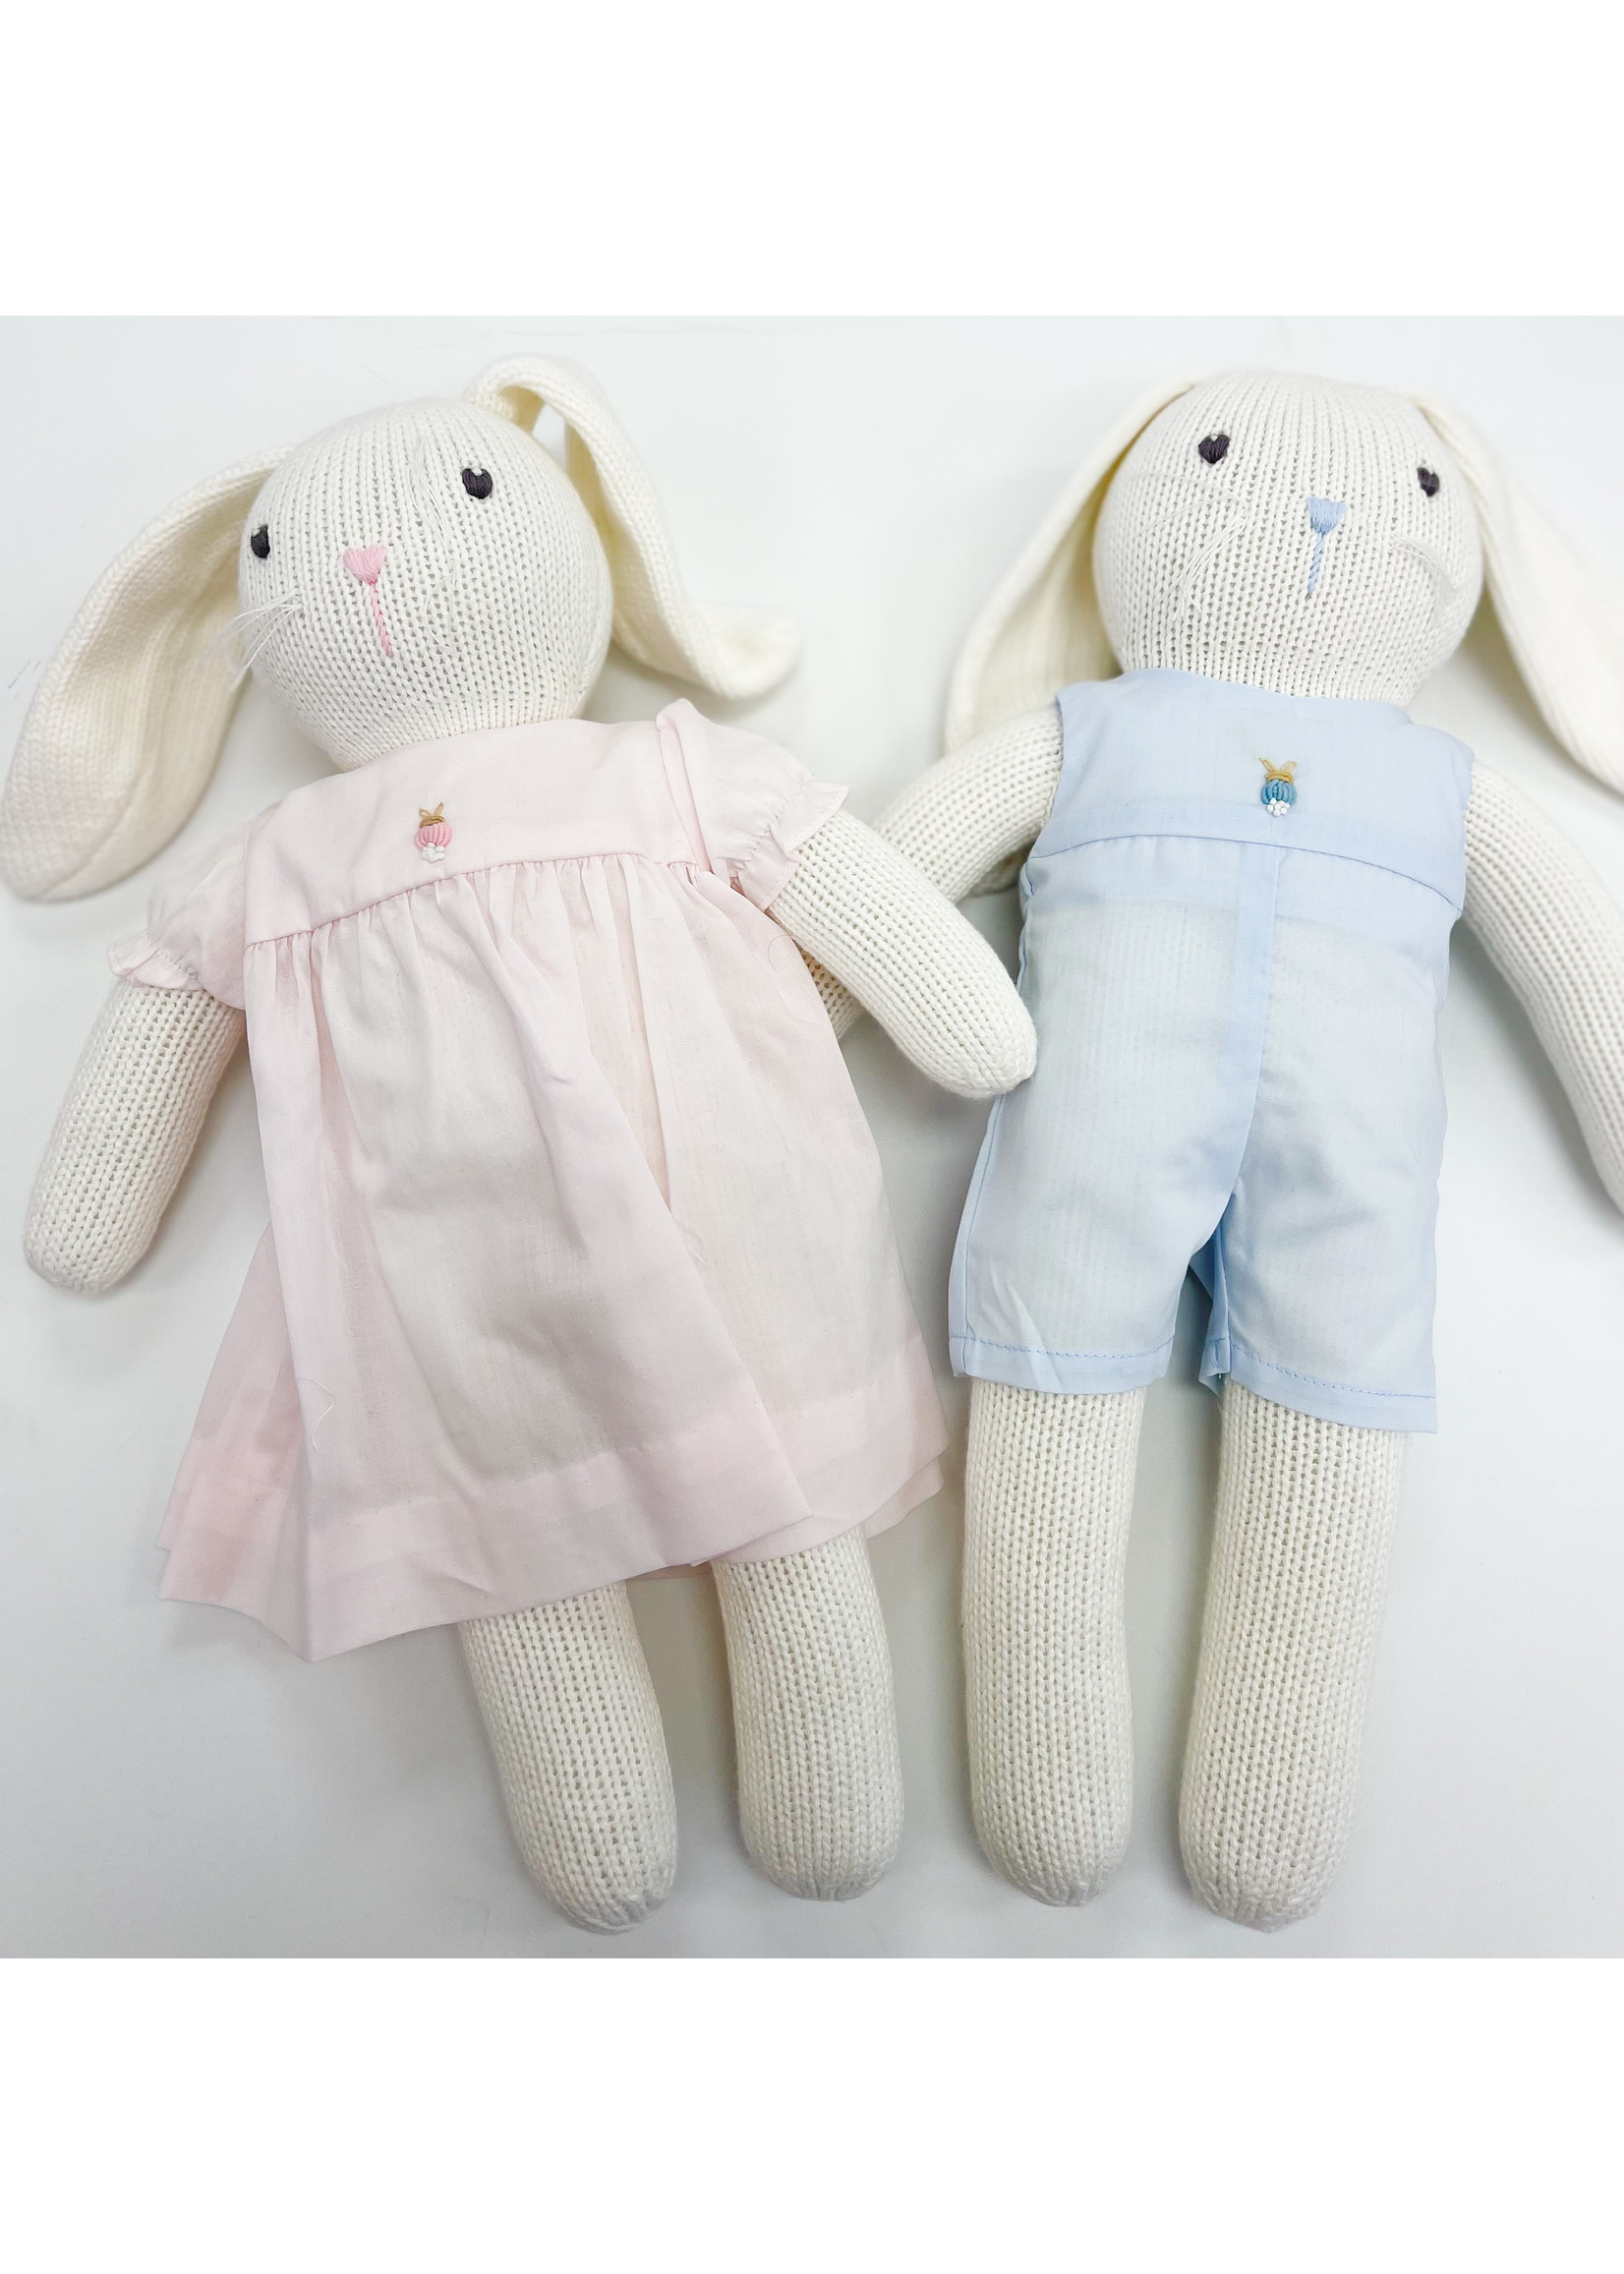 Zubels Bunny 14.5 Pastel Outfit